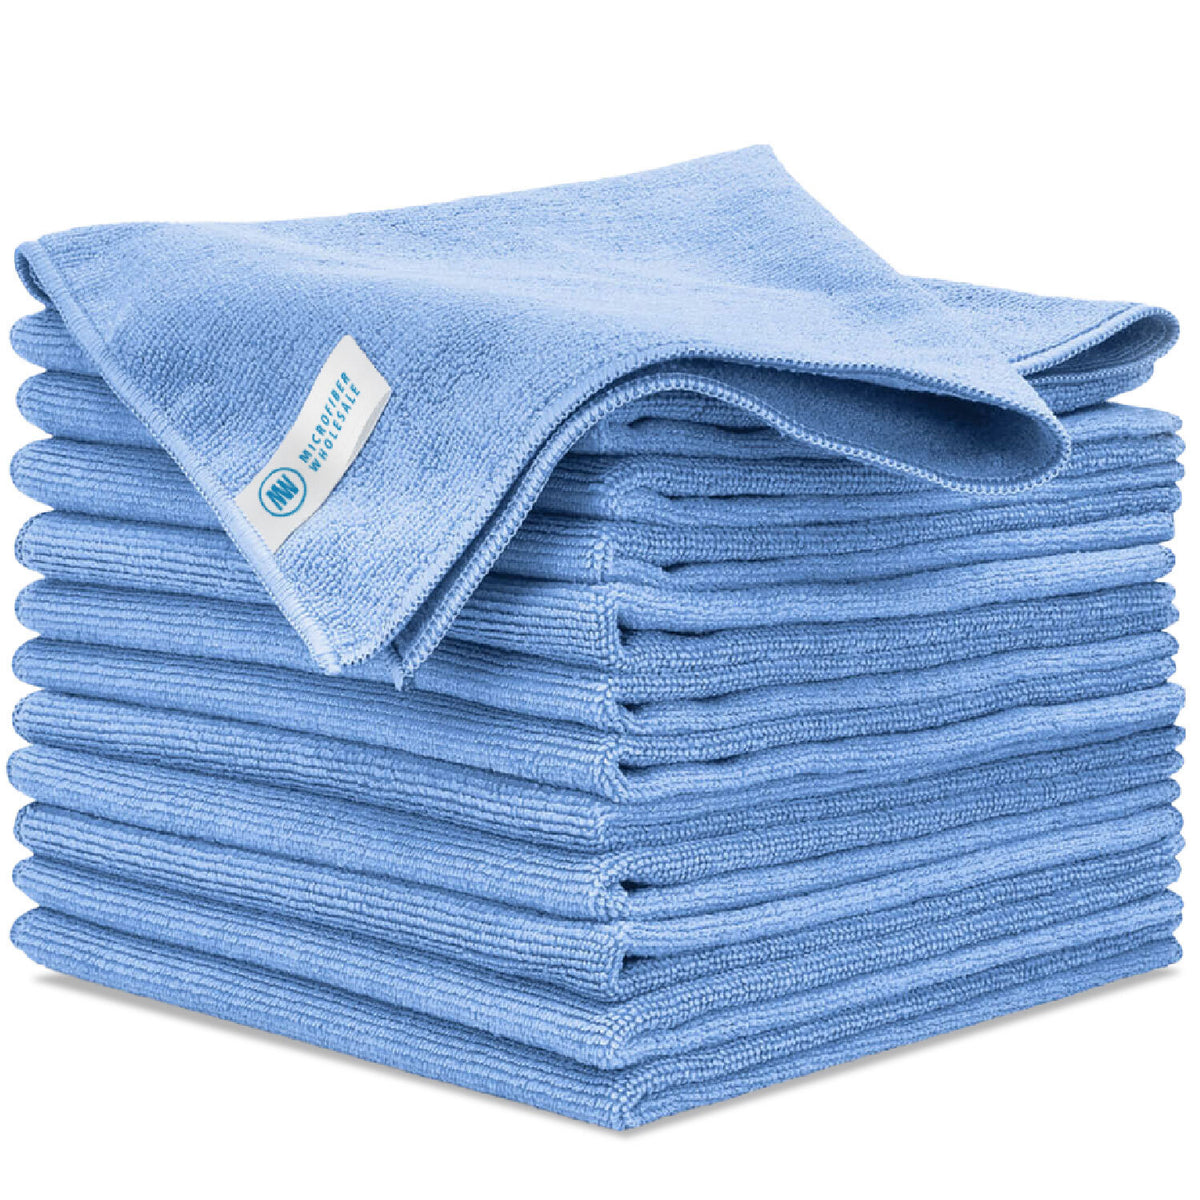 16”x16” MW Pro Multi-Surface Microfiber Towel - Pack of 12